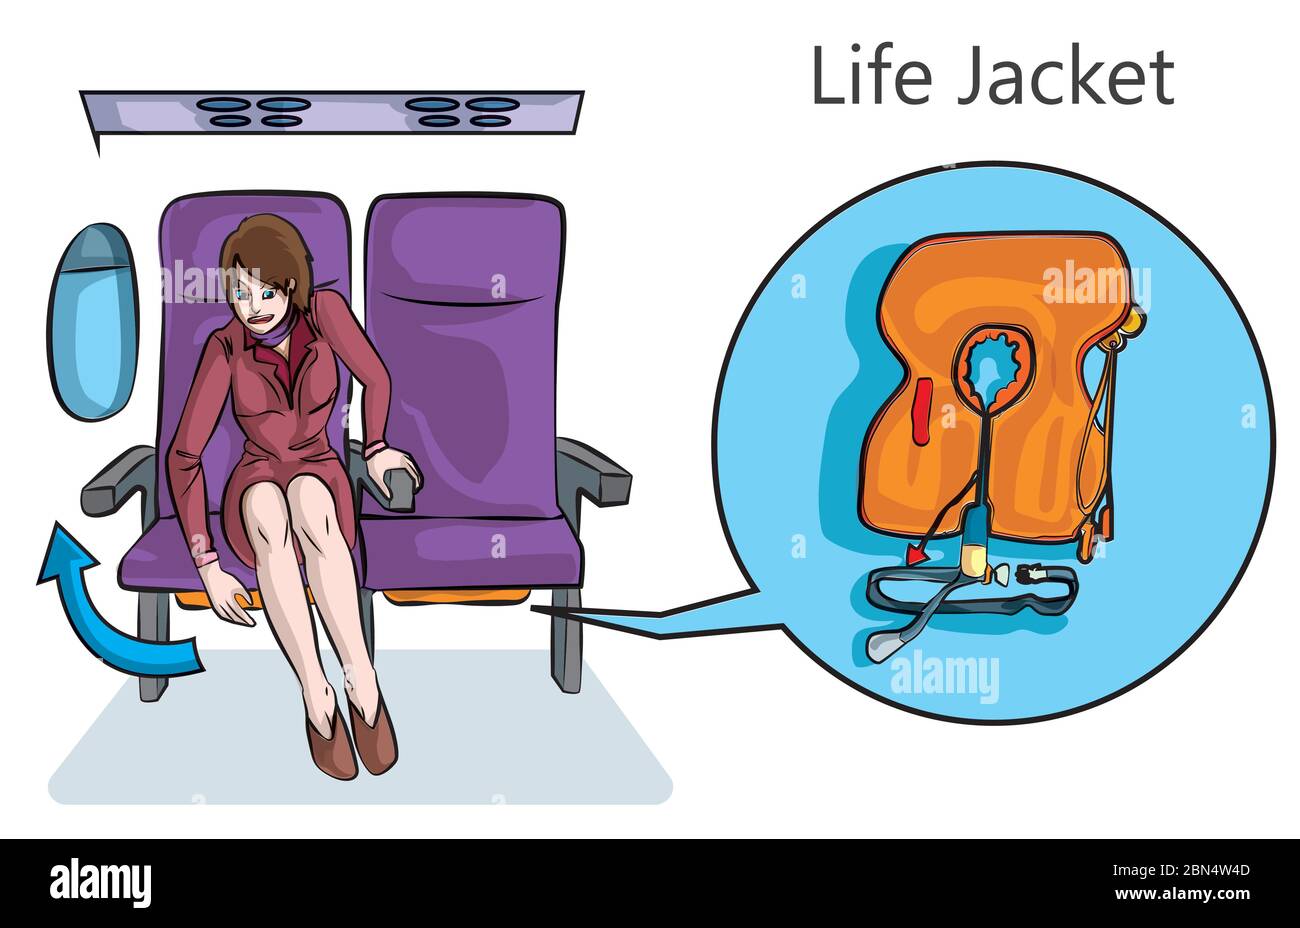 Airlines showing how to pick up life jackets under the passenger seat. Stock Vector